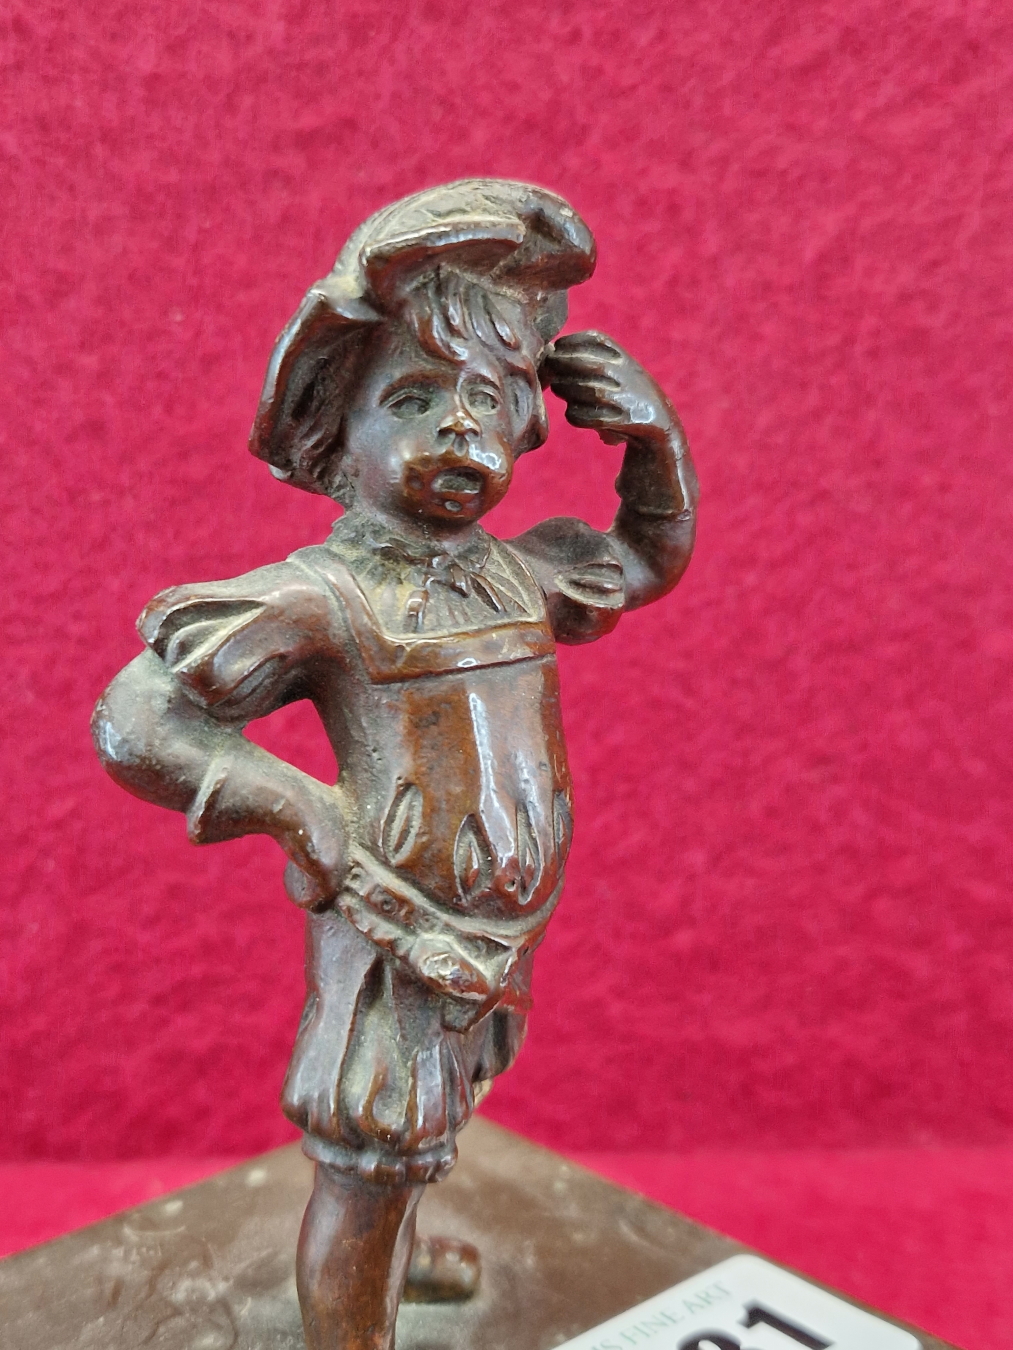 AN ANTIQUE BRONZE FIGURE OF A RENAISSANCE BOY WITH HIS RIGHT HAND ON HIS HIP AND HIS LEFT TO HIS - Image 2 of 4